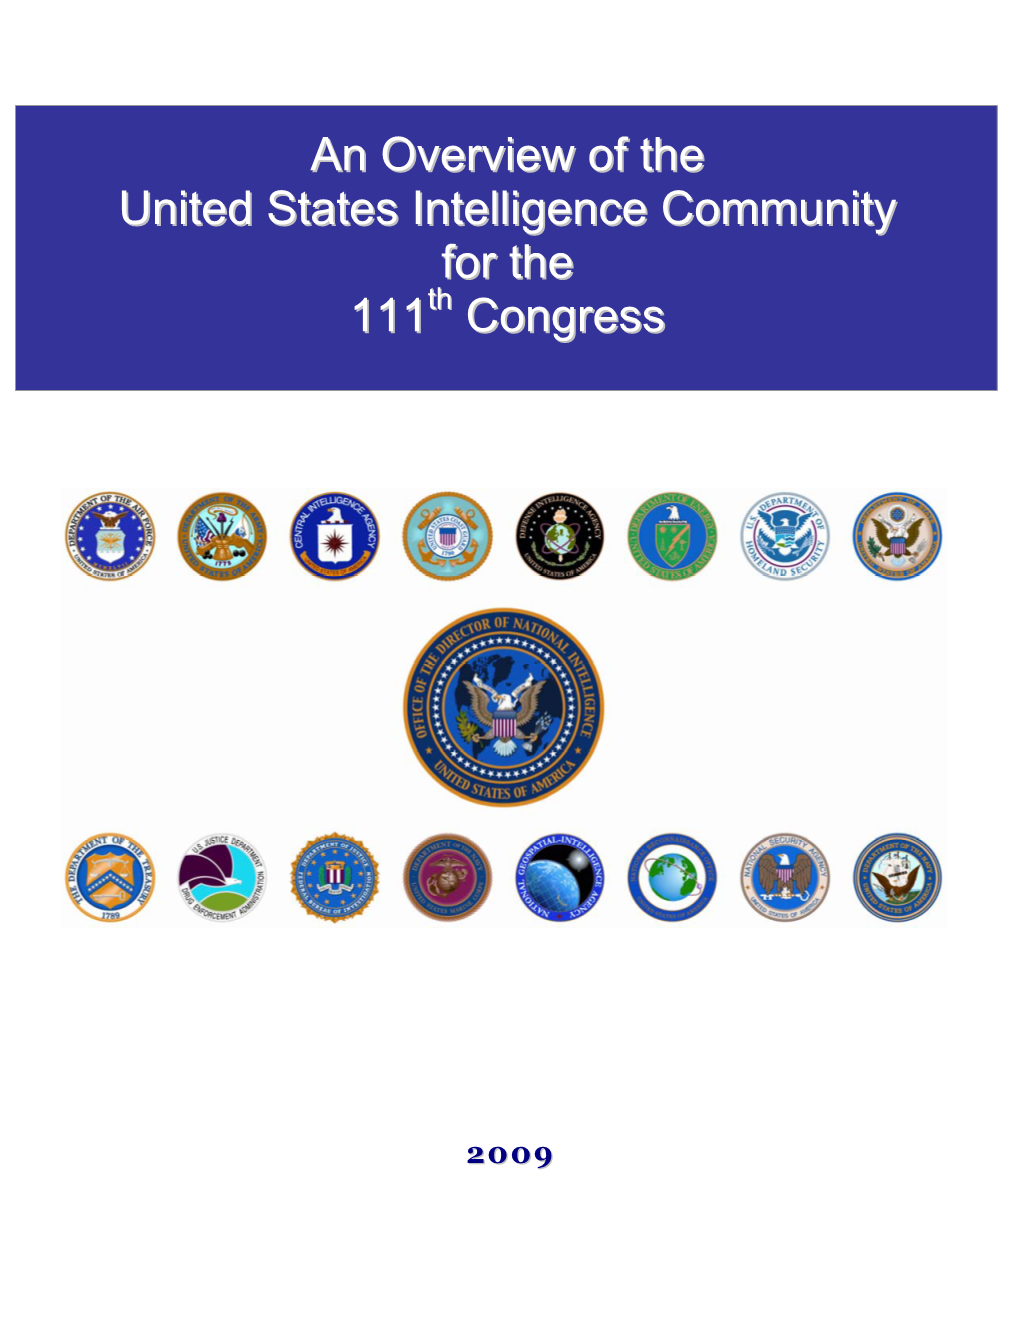 An Overview of the United States Intelligence Community for the 111